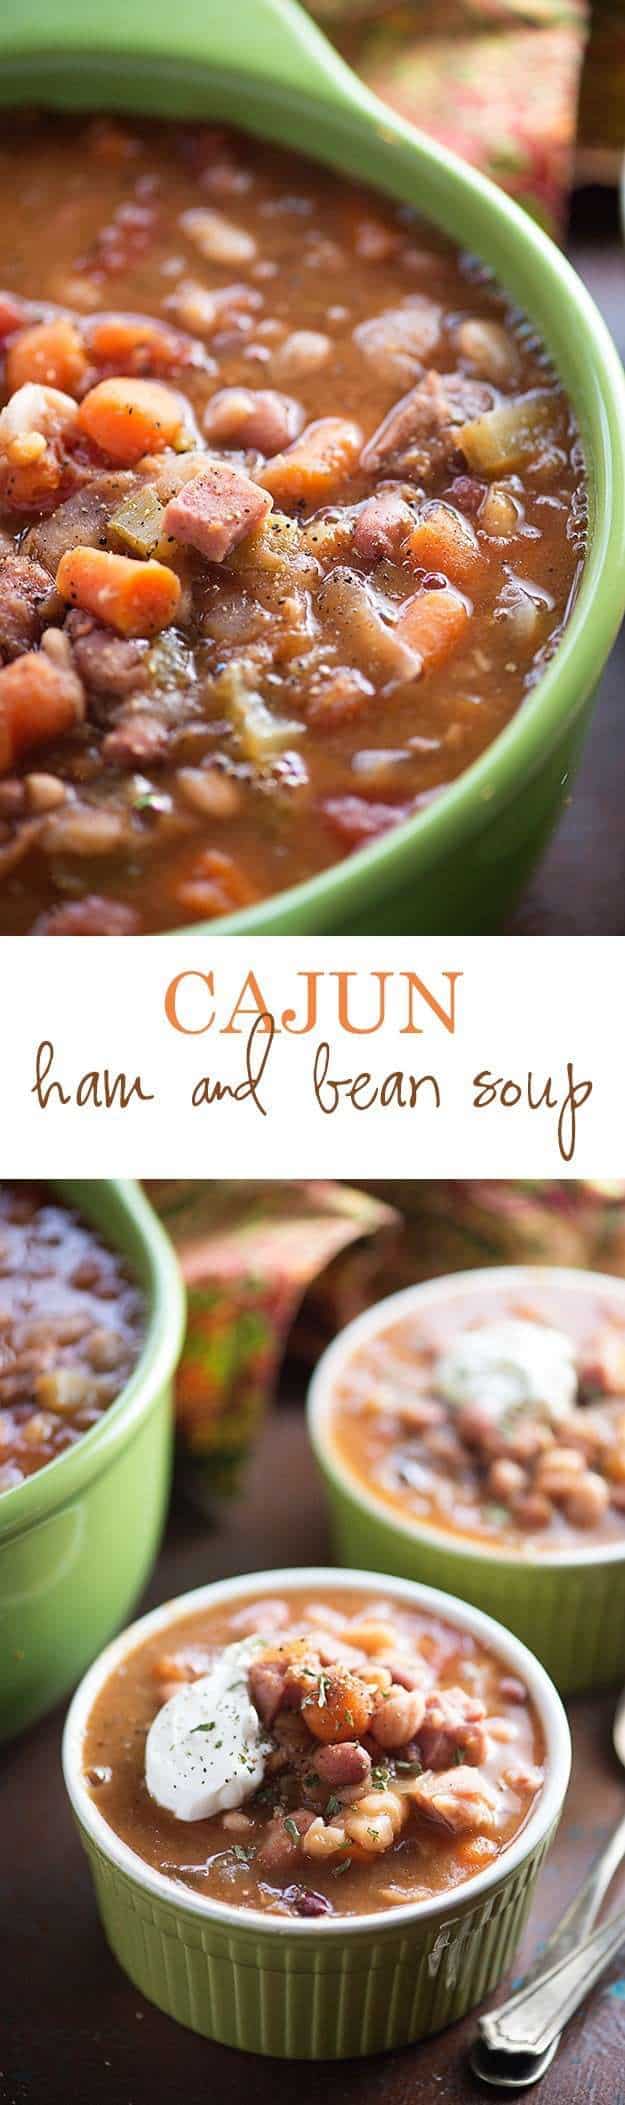 Cajun soup in a bowl on a wooden table.